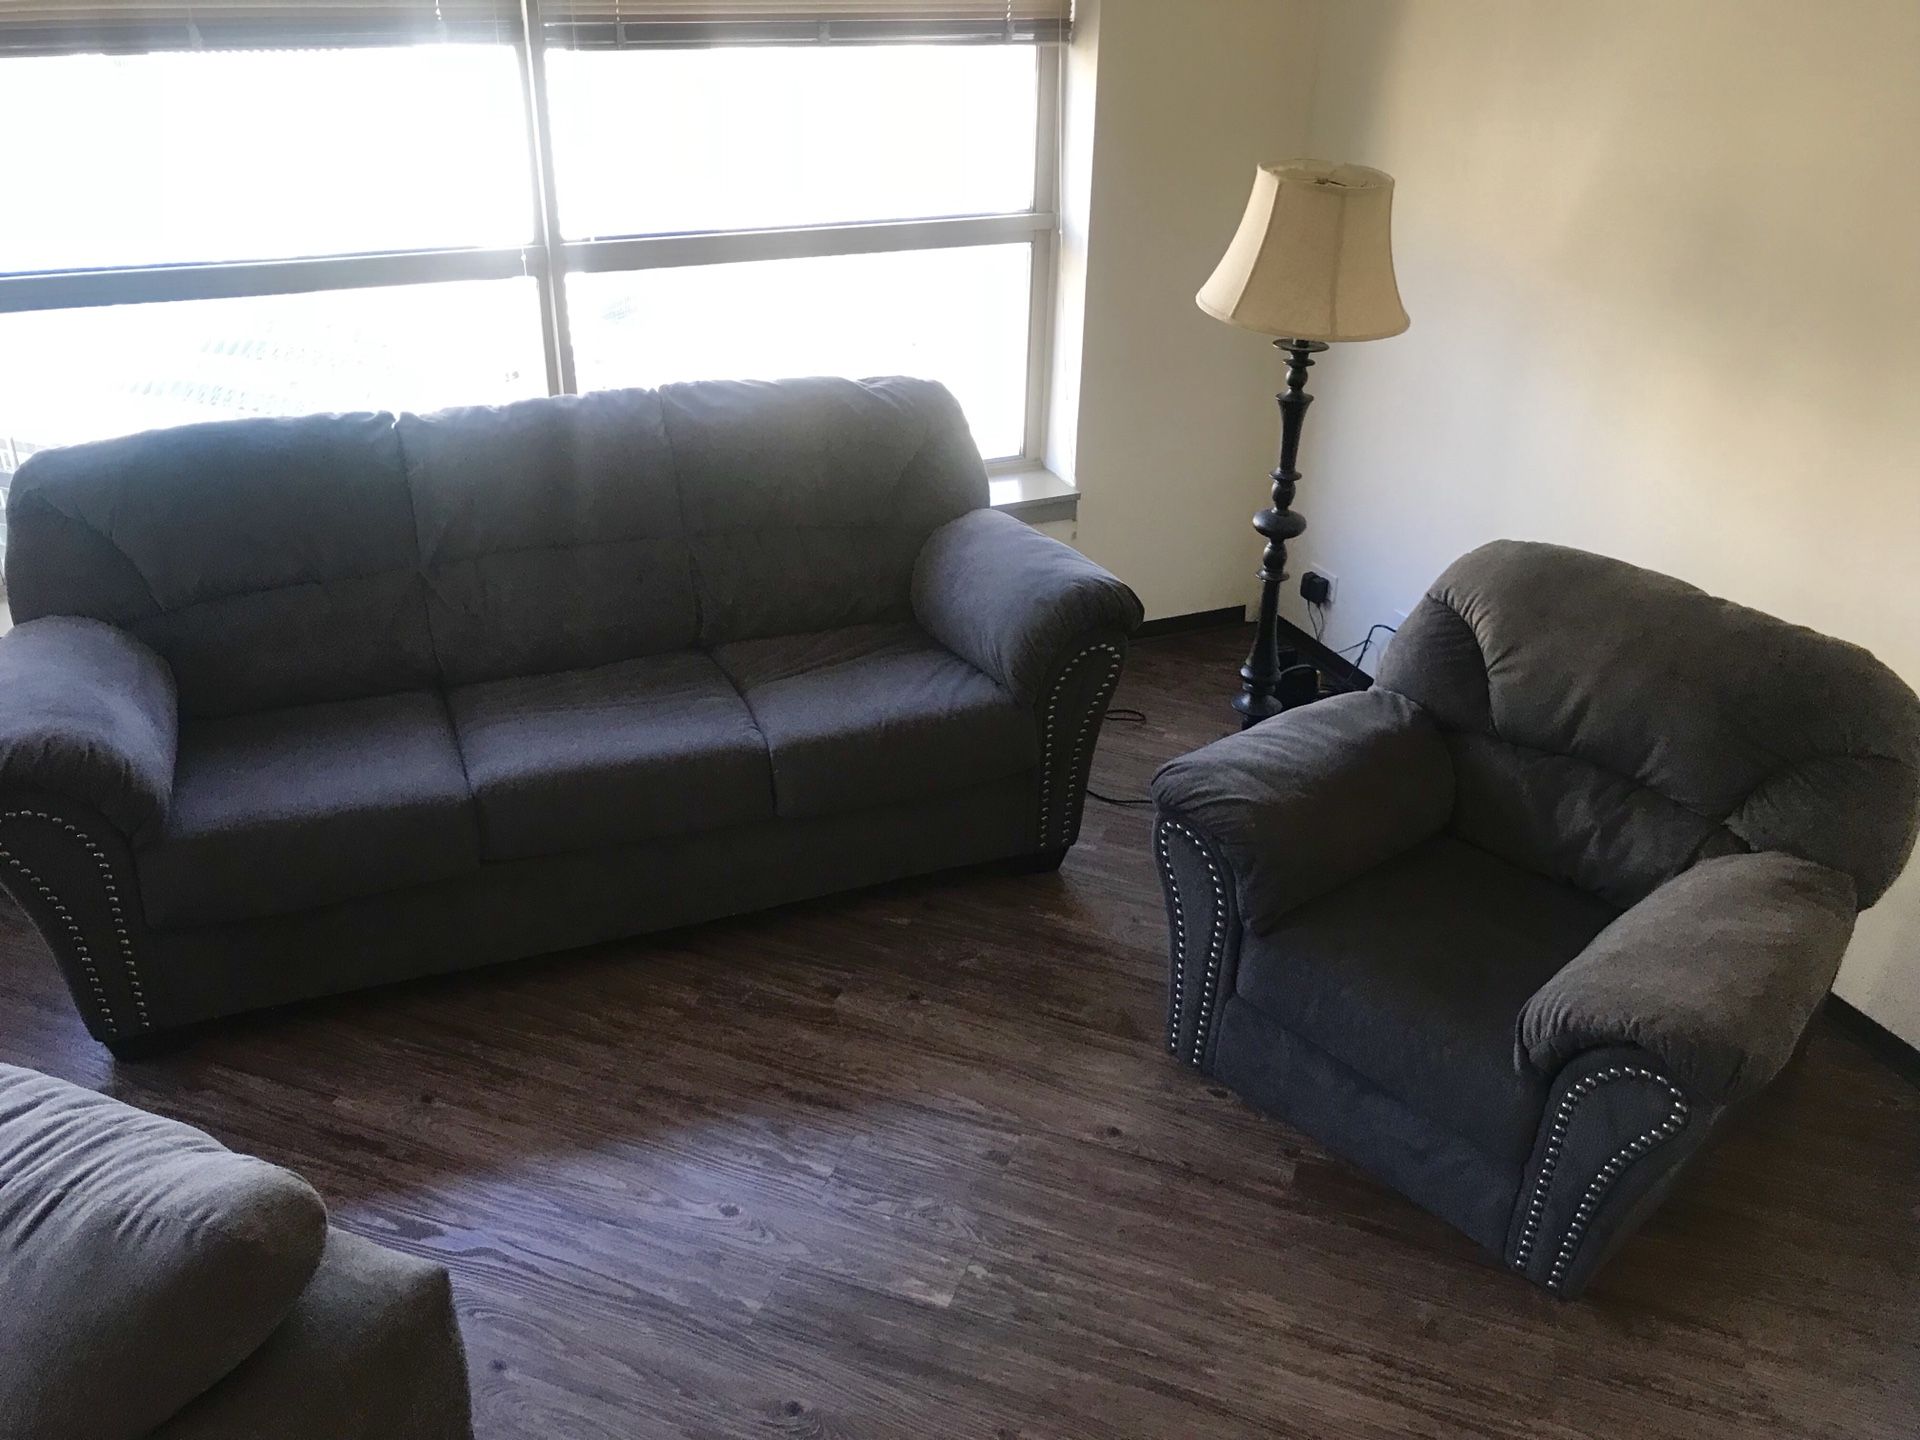 BEAUTIFUL GREY COUCH SOFA SET grey couch